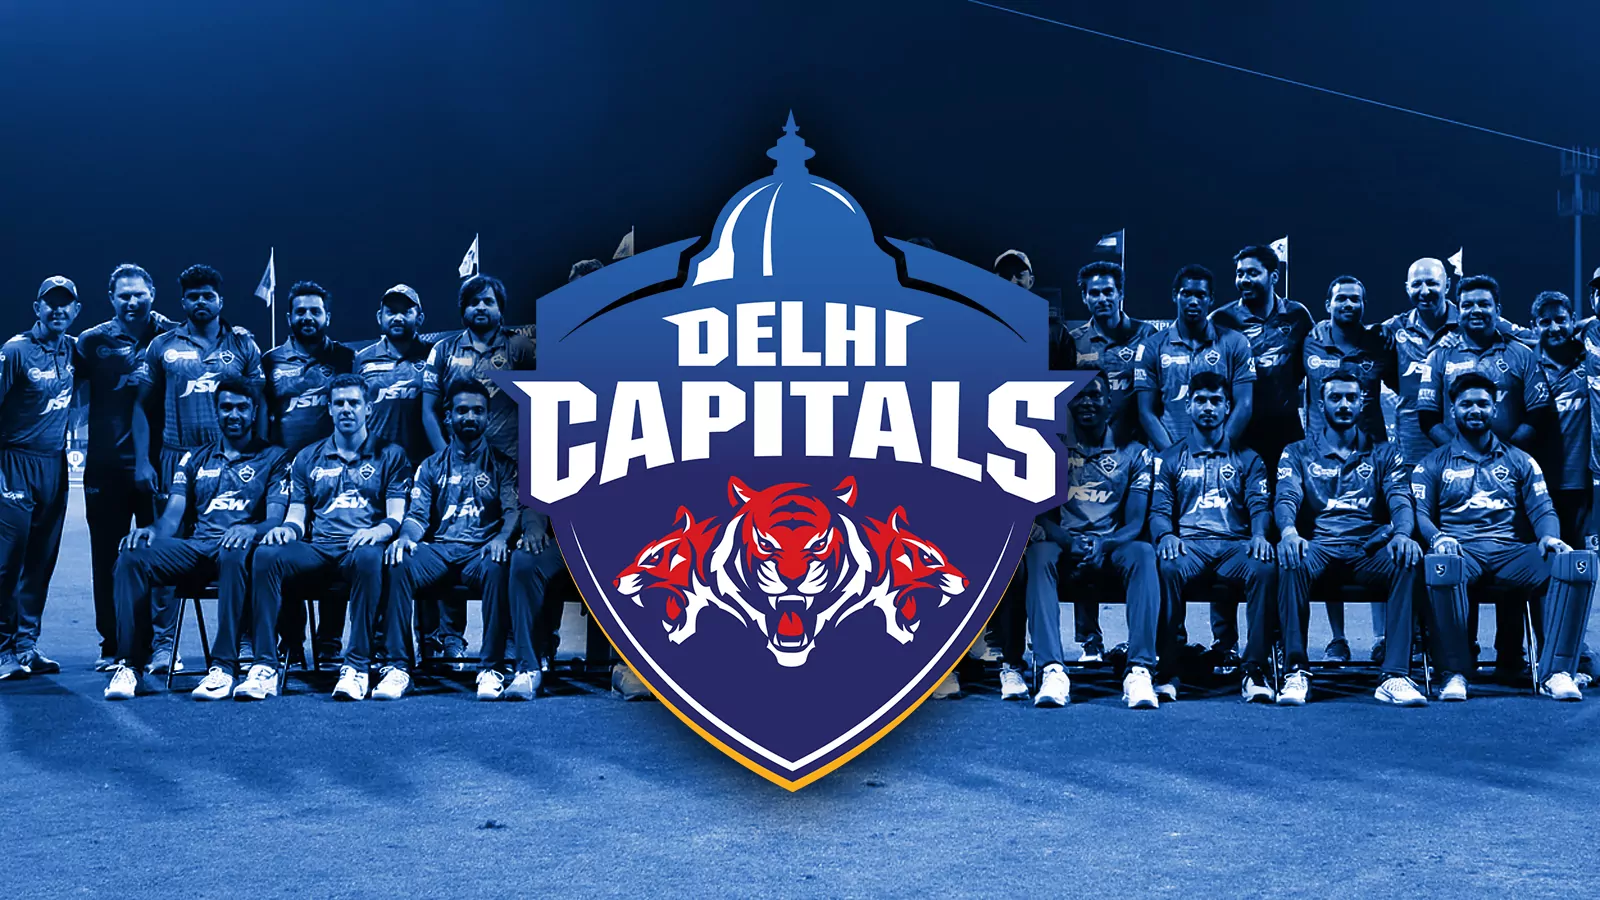 The team that is interesting to be followed and betted on during IPL 2022.